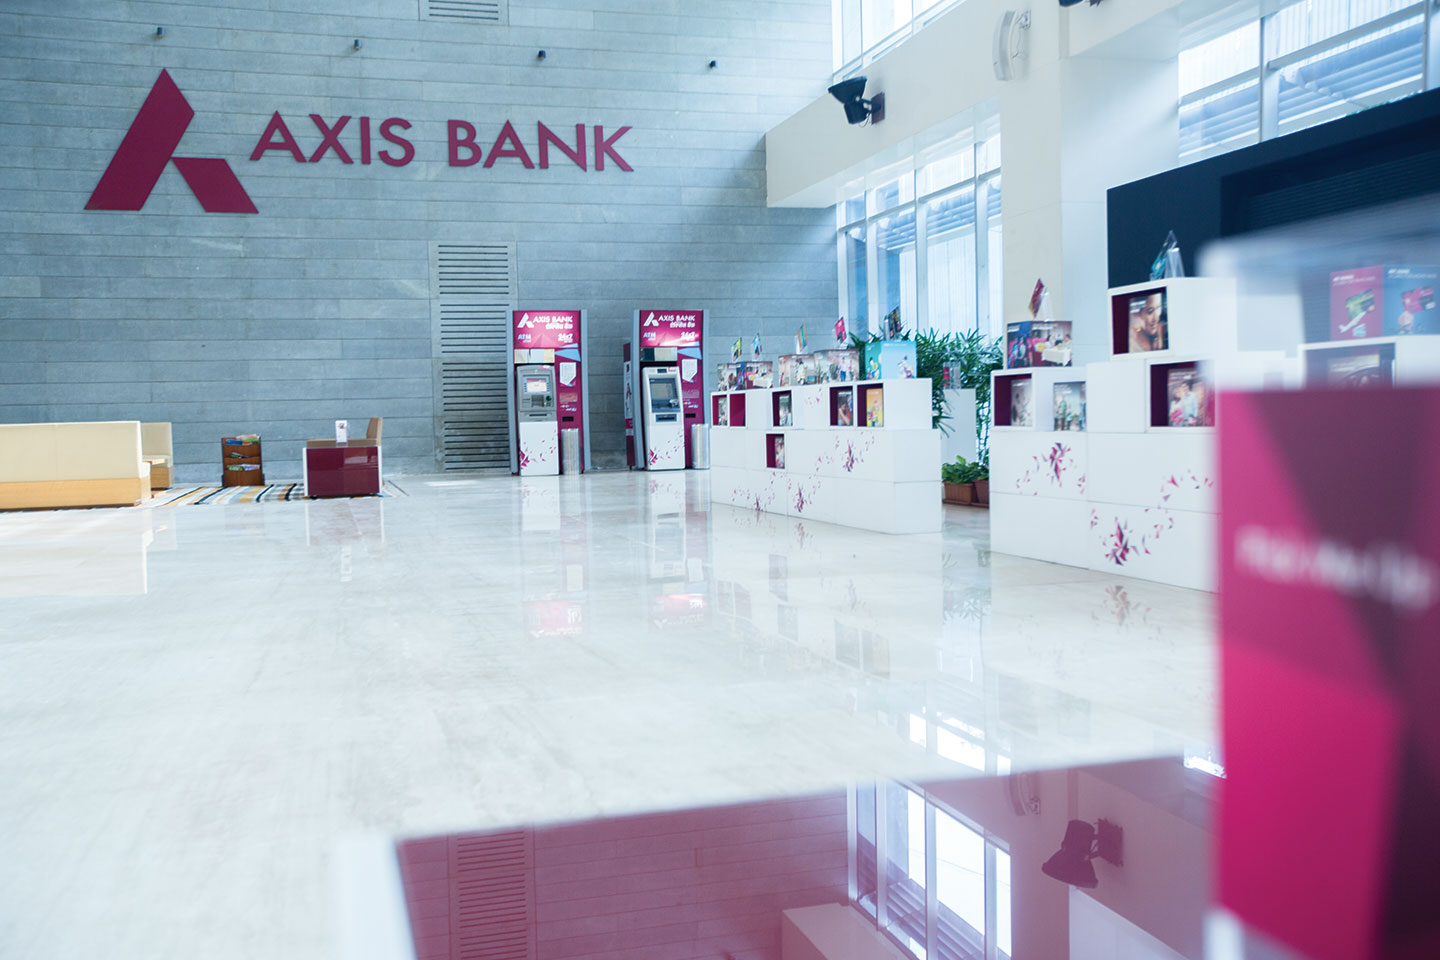 Axis Bank posts Q2 profit at Rs 1,683 crore versus loss last year; NII grows 20% YoY